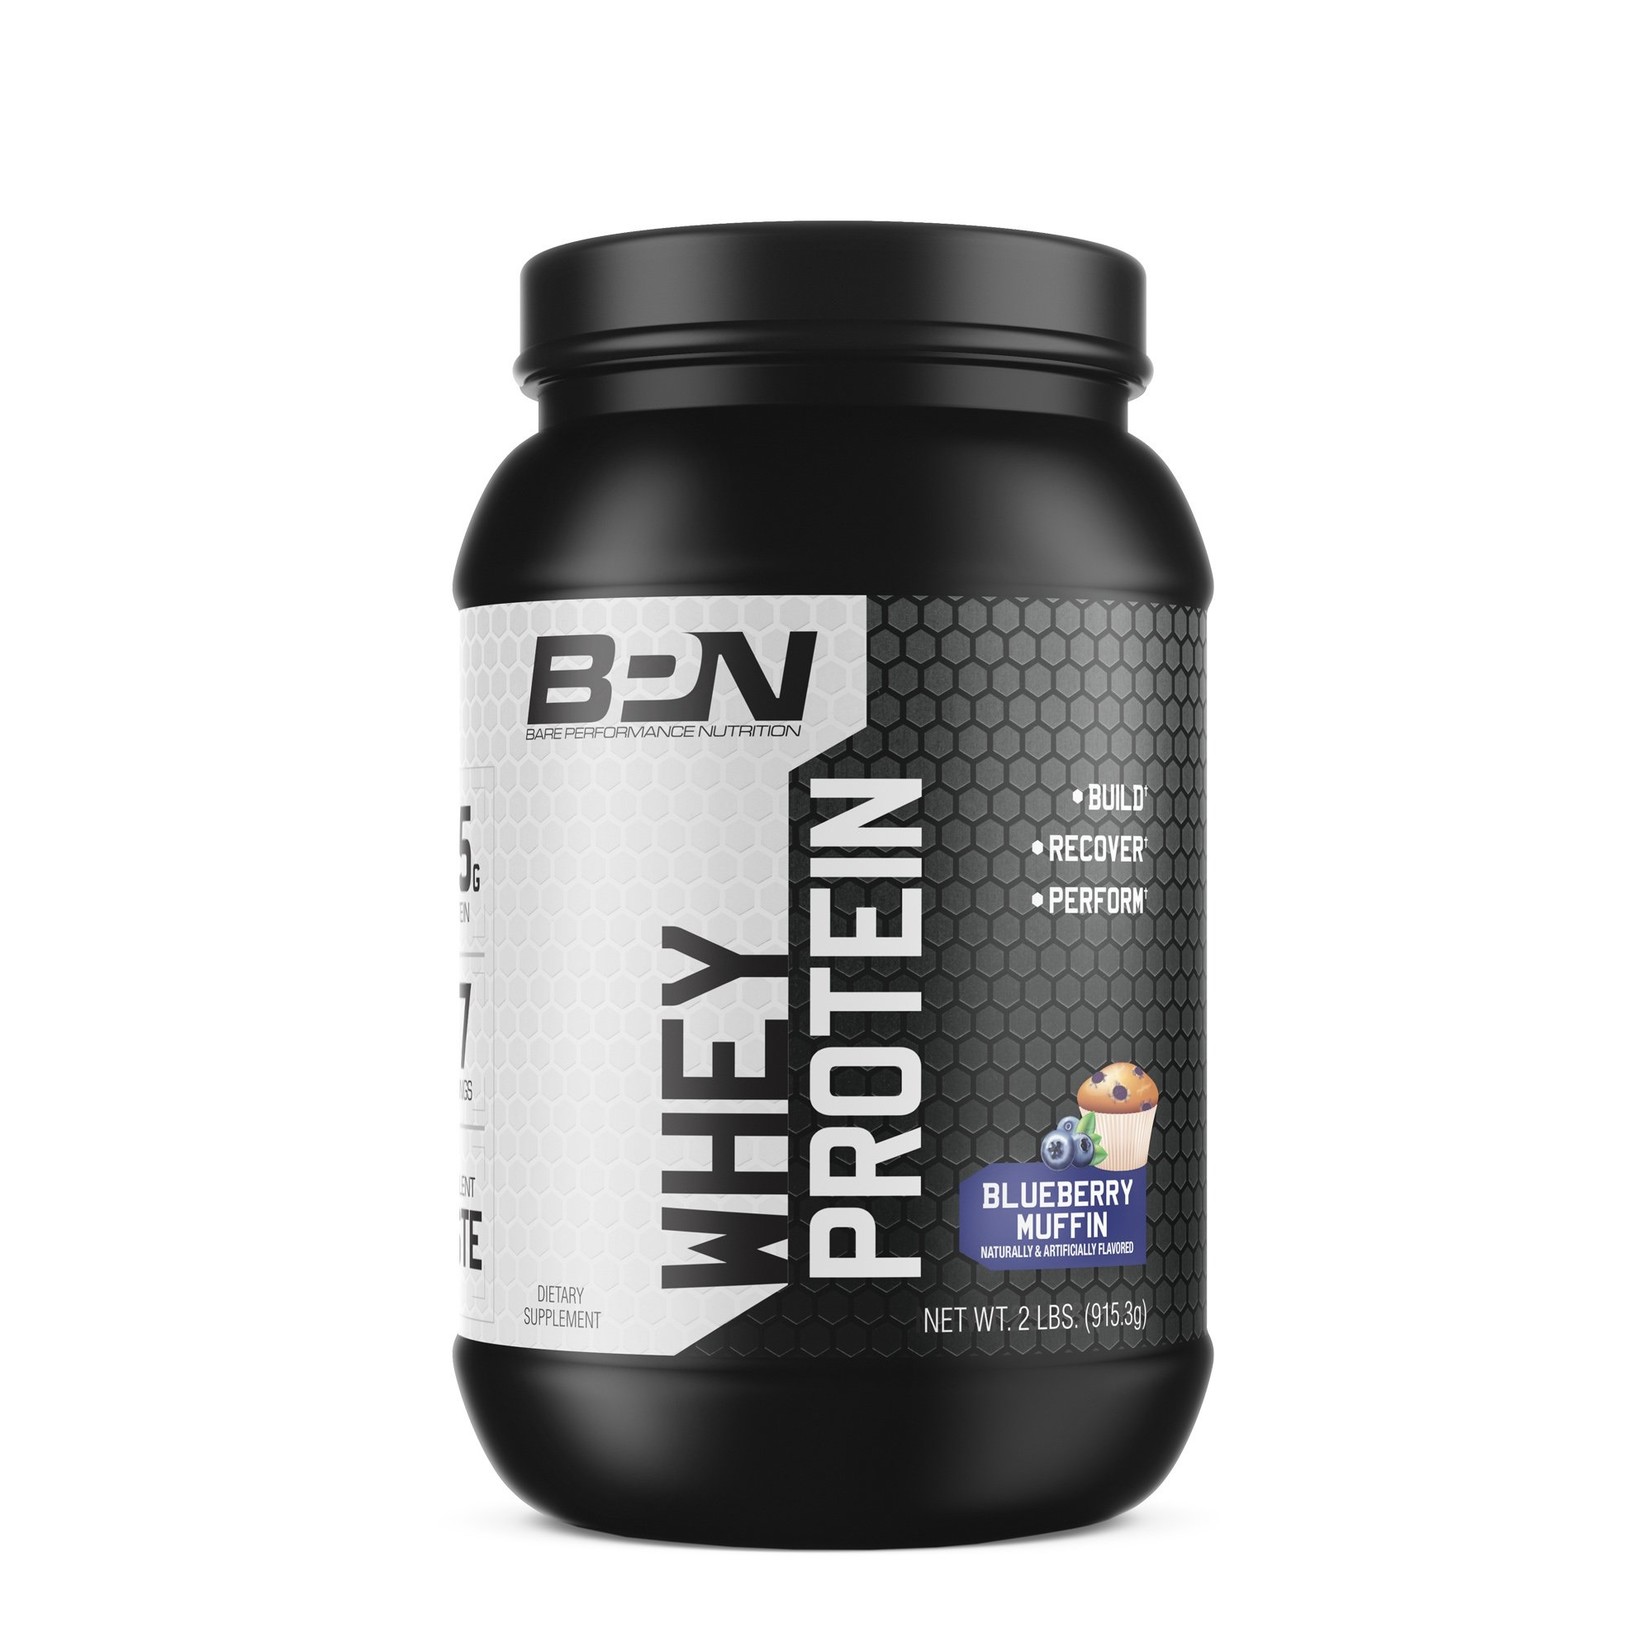 Bare Performance Nutrition BPN Whey Protein